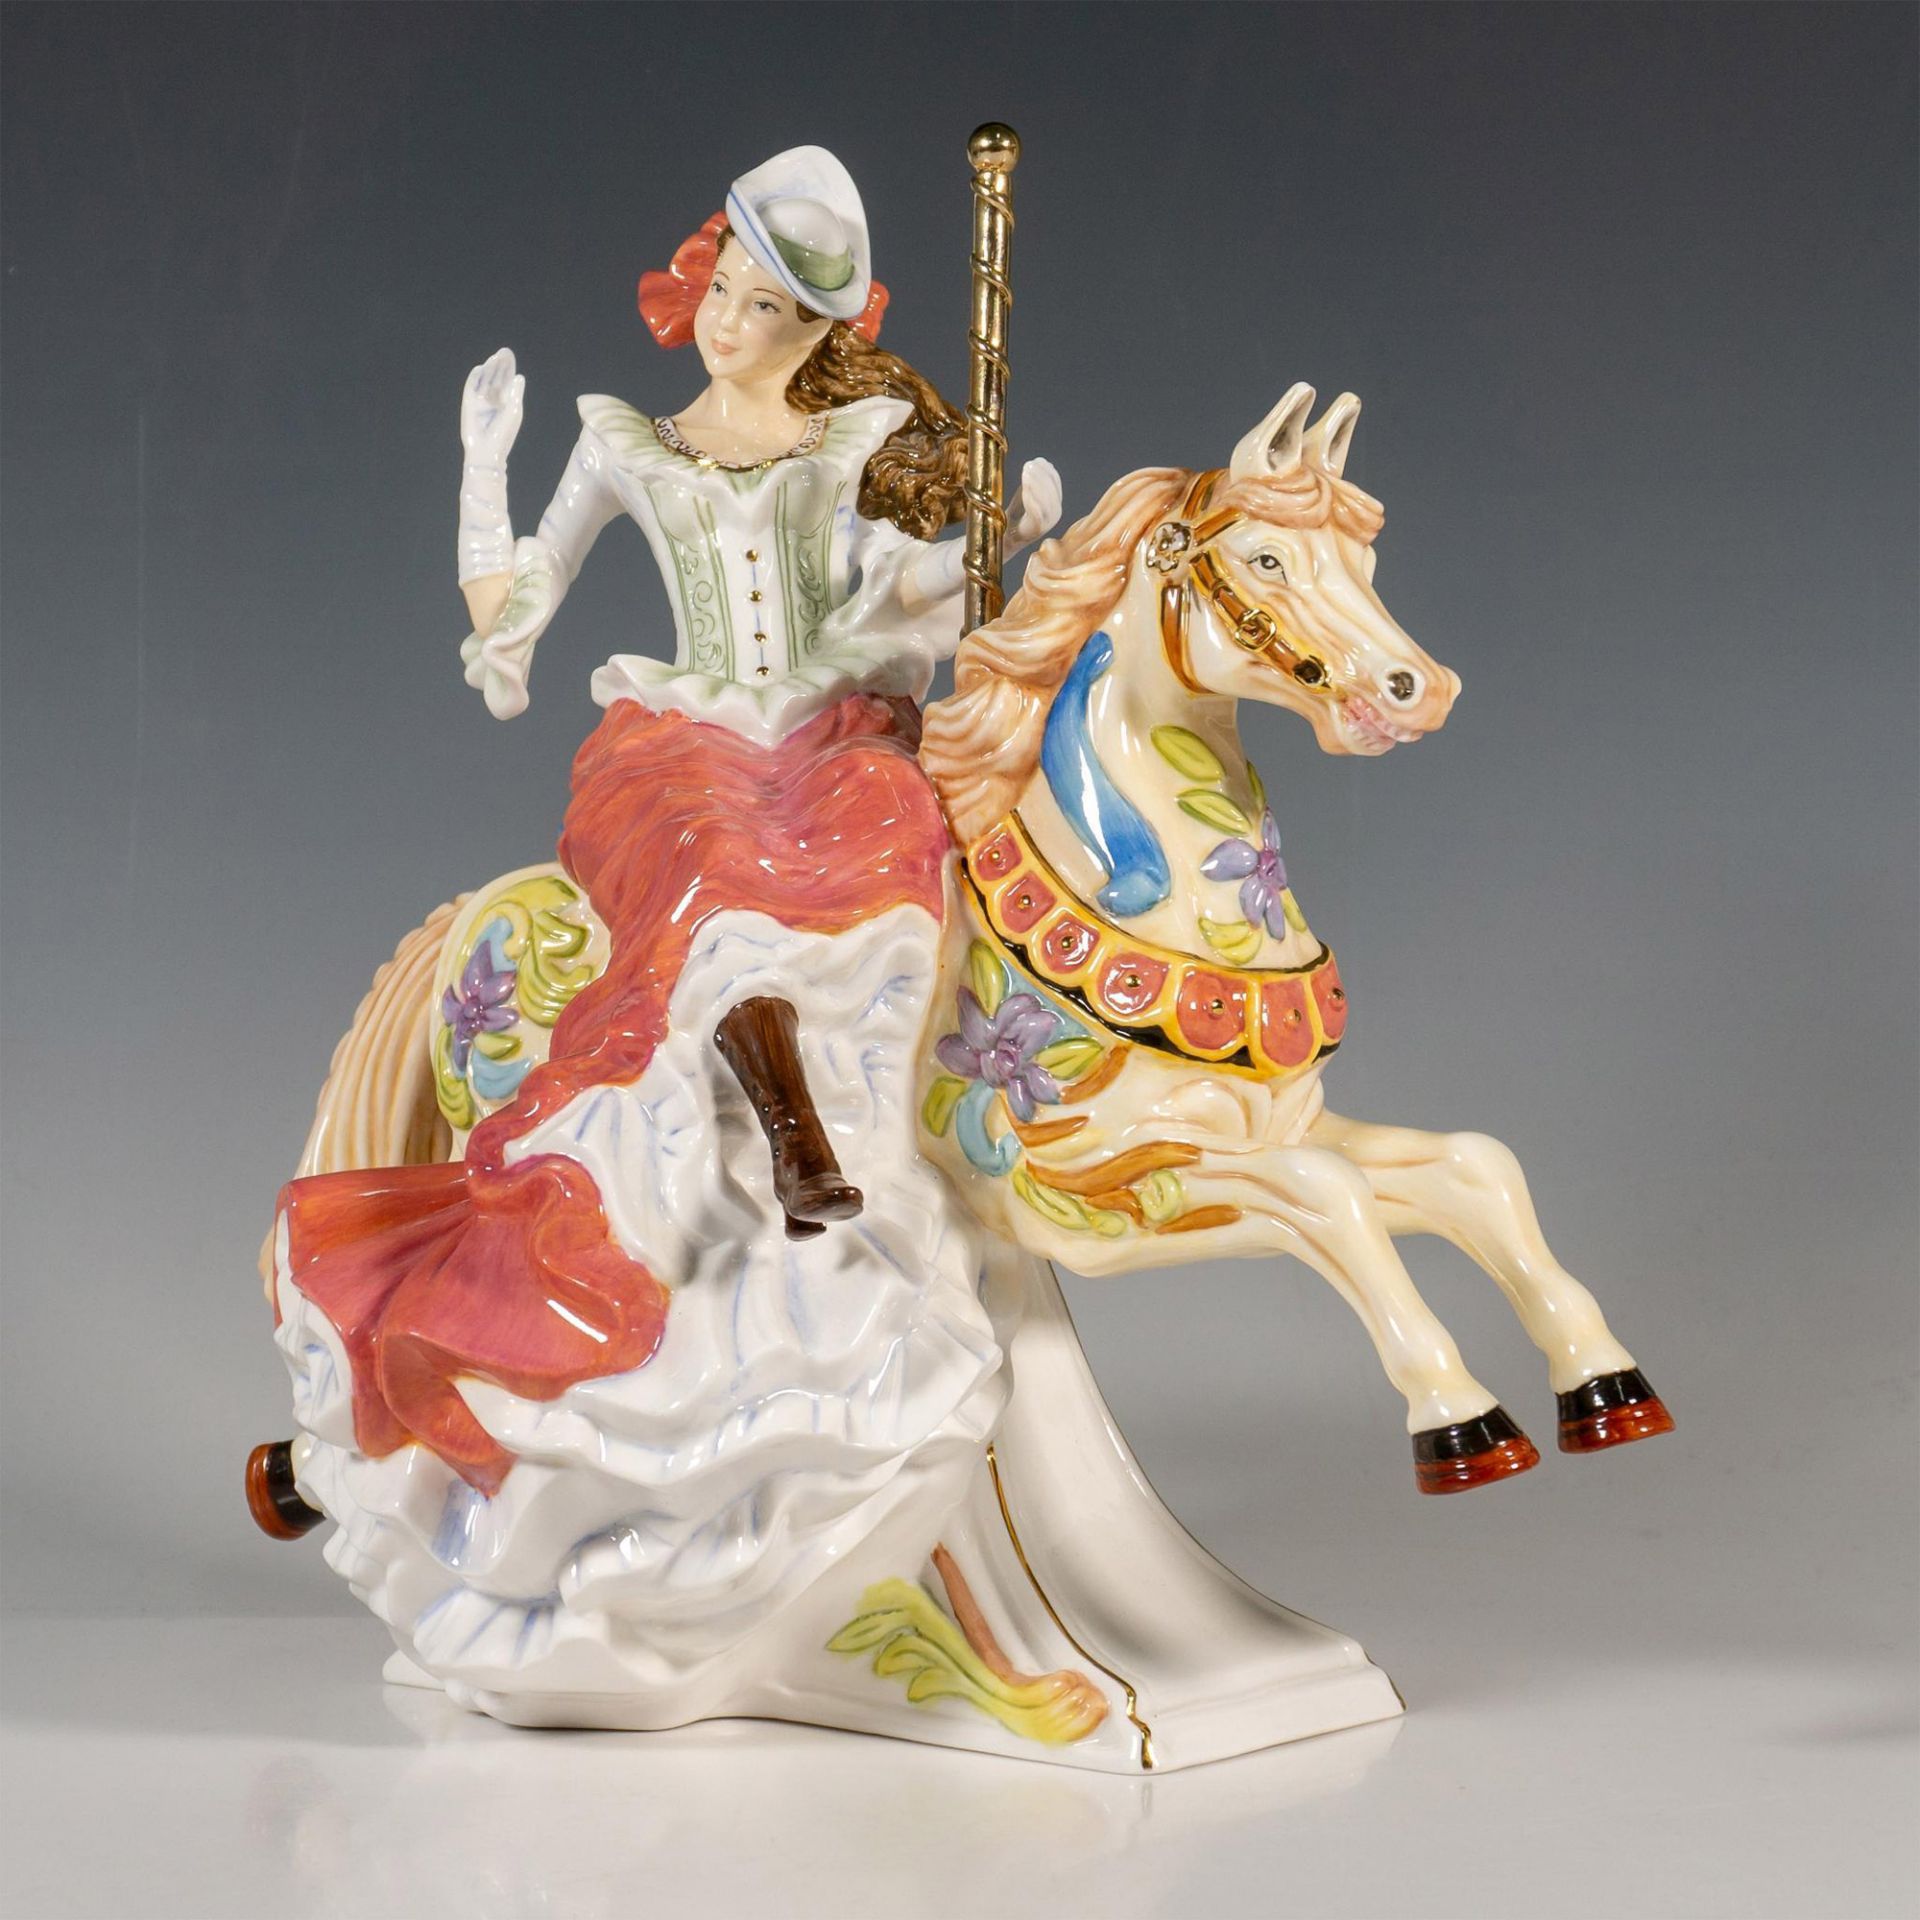 The English Ladies Porcelain Figurine, Carousel Collection - Image 2 of 4